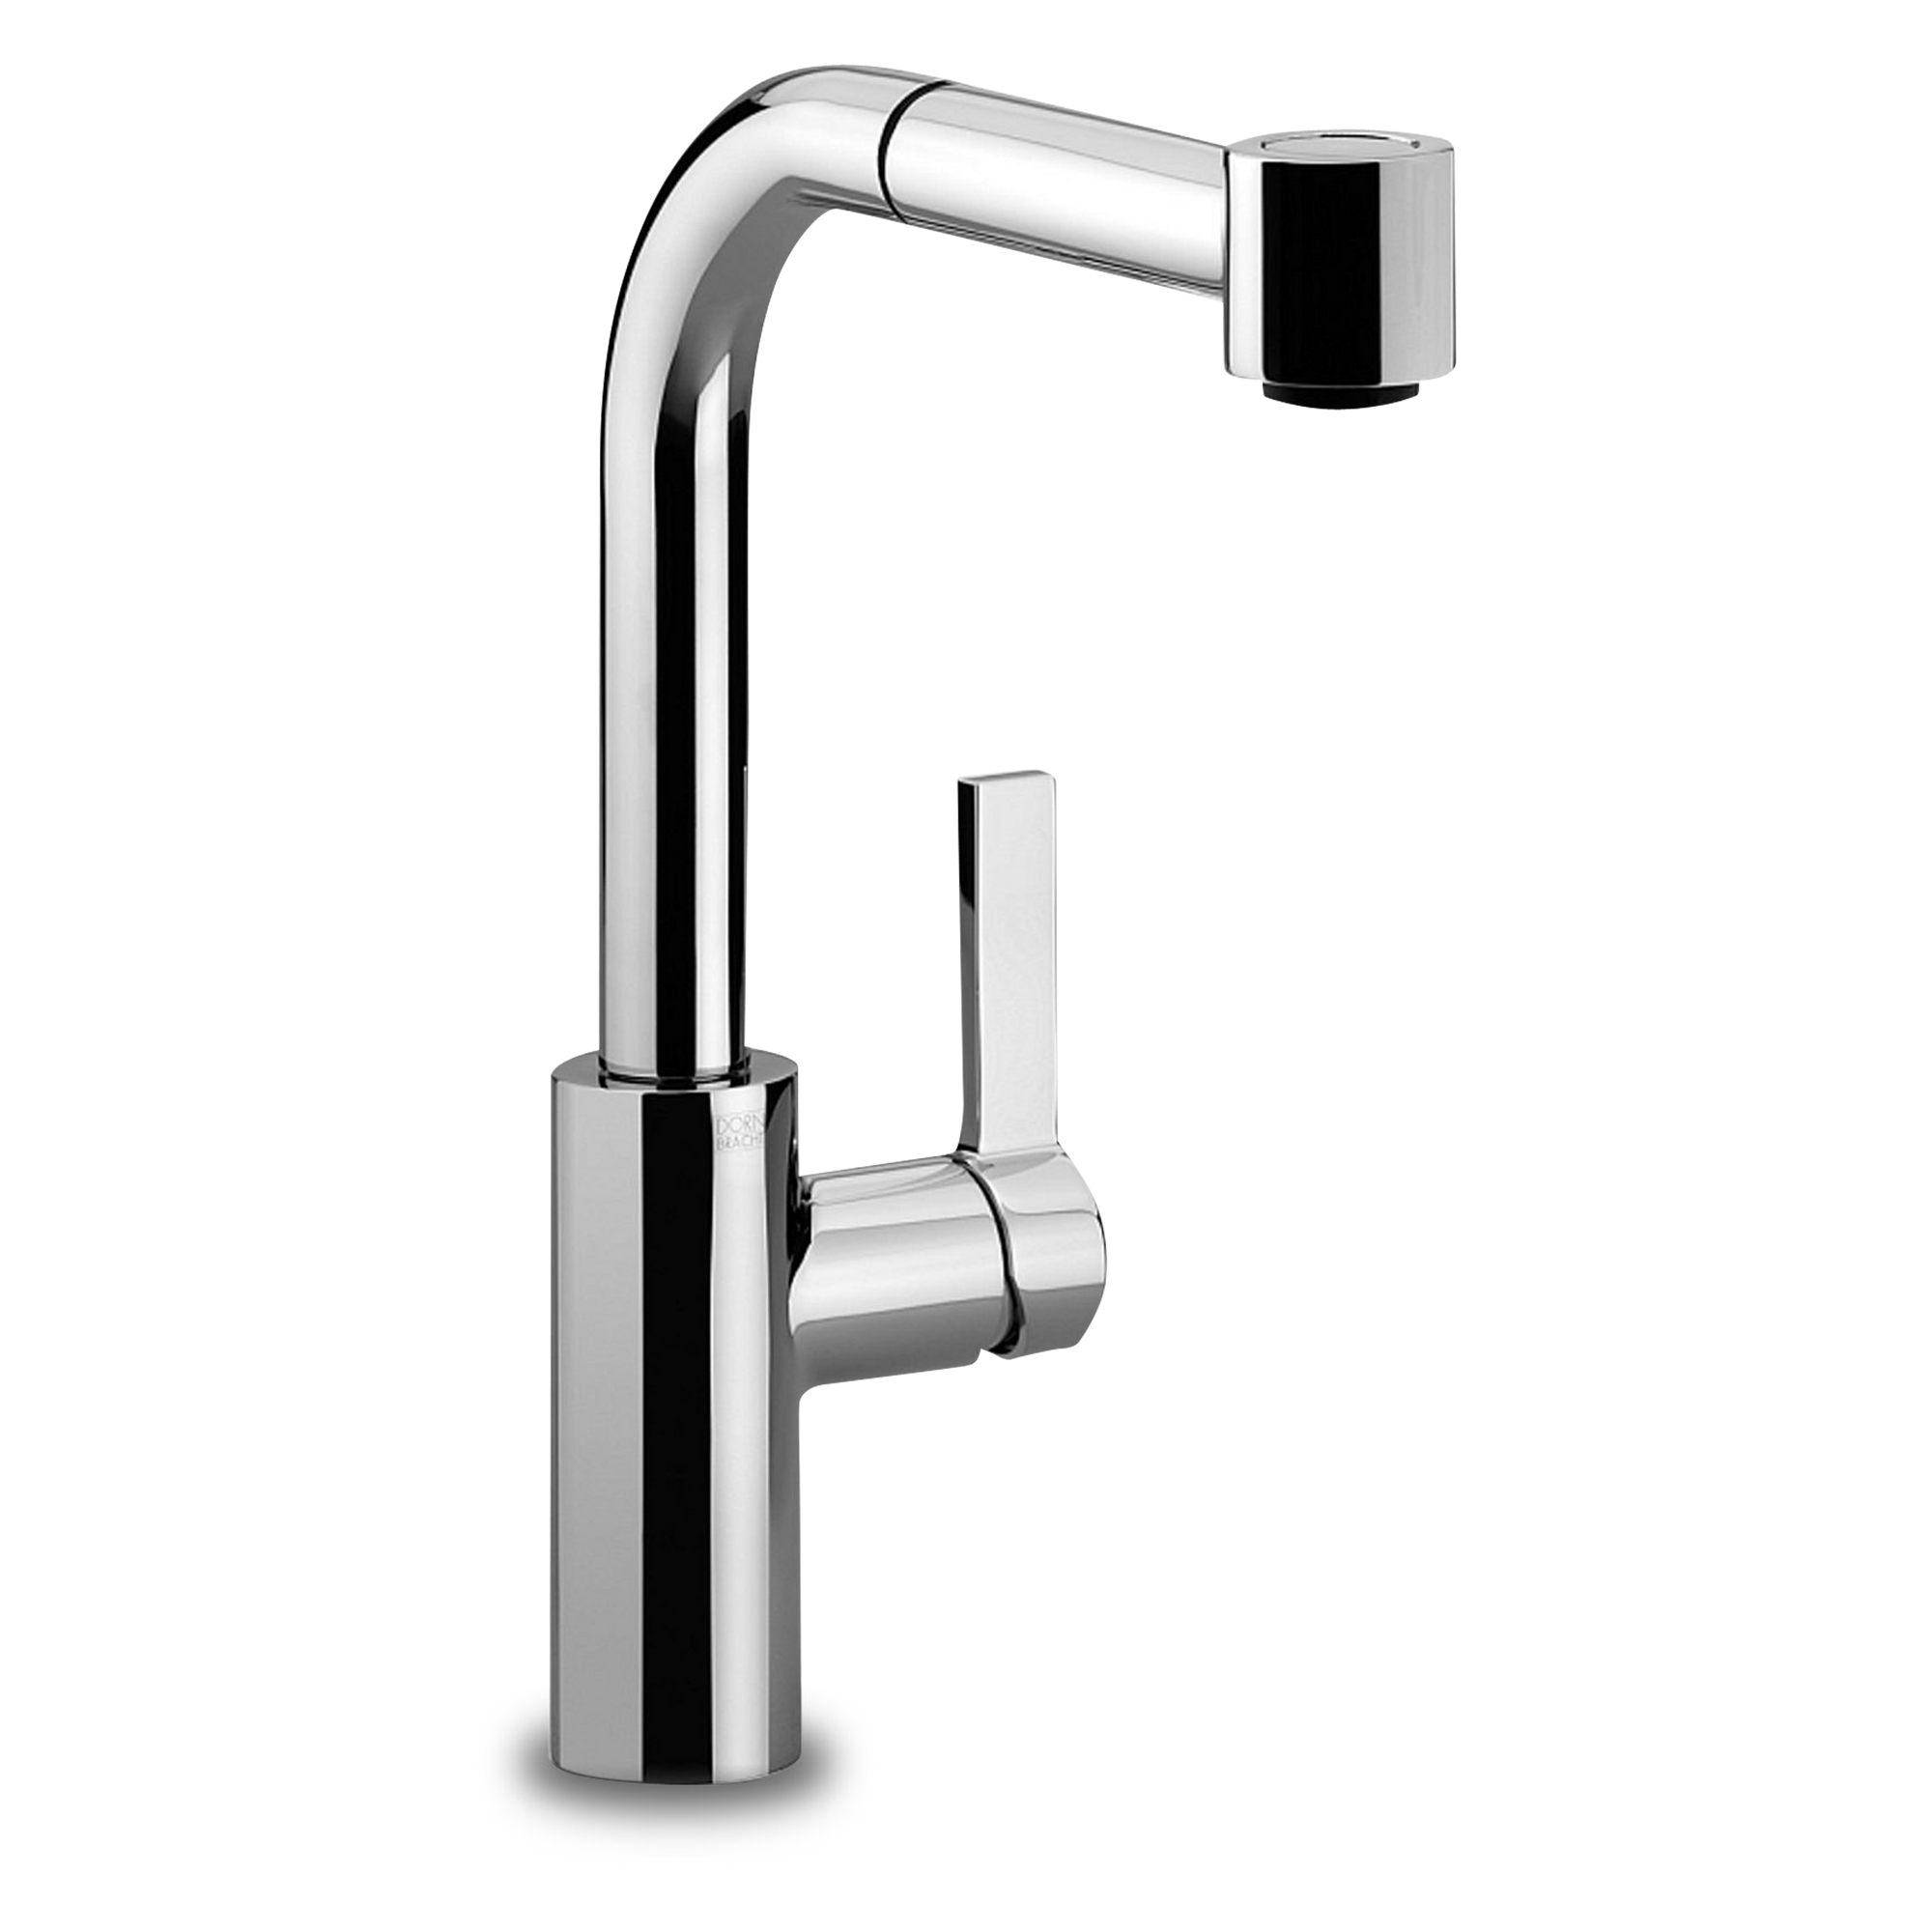 A seamless, modern pull-out kitchen faucet featuring a 360 degree swivel spout with single-lever operation.